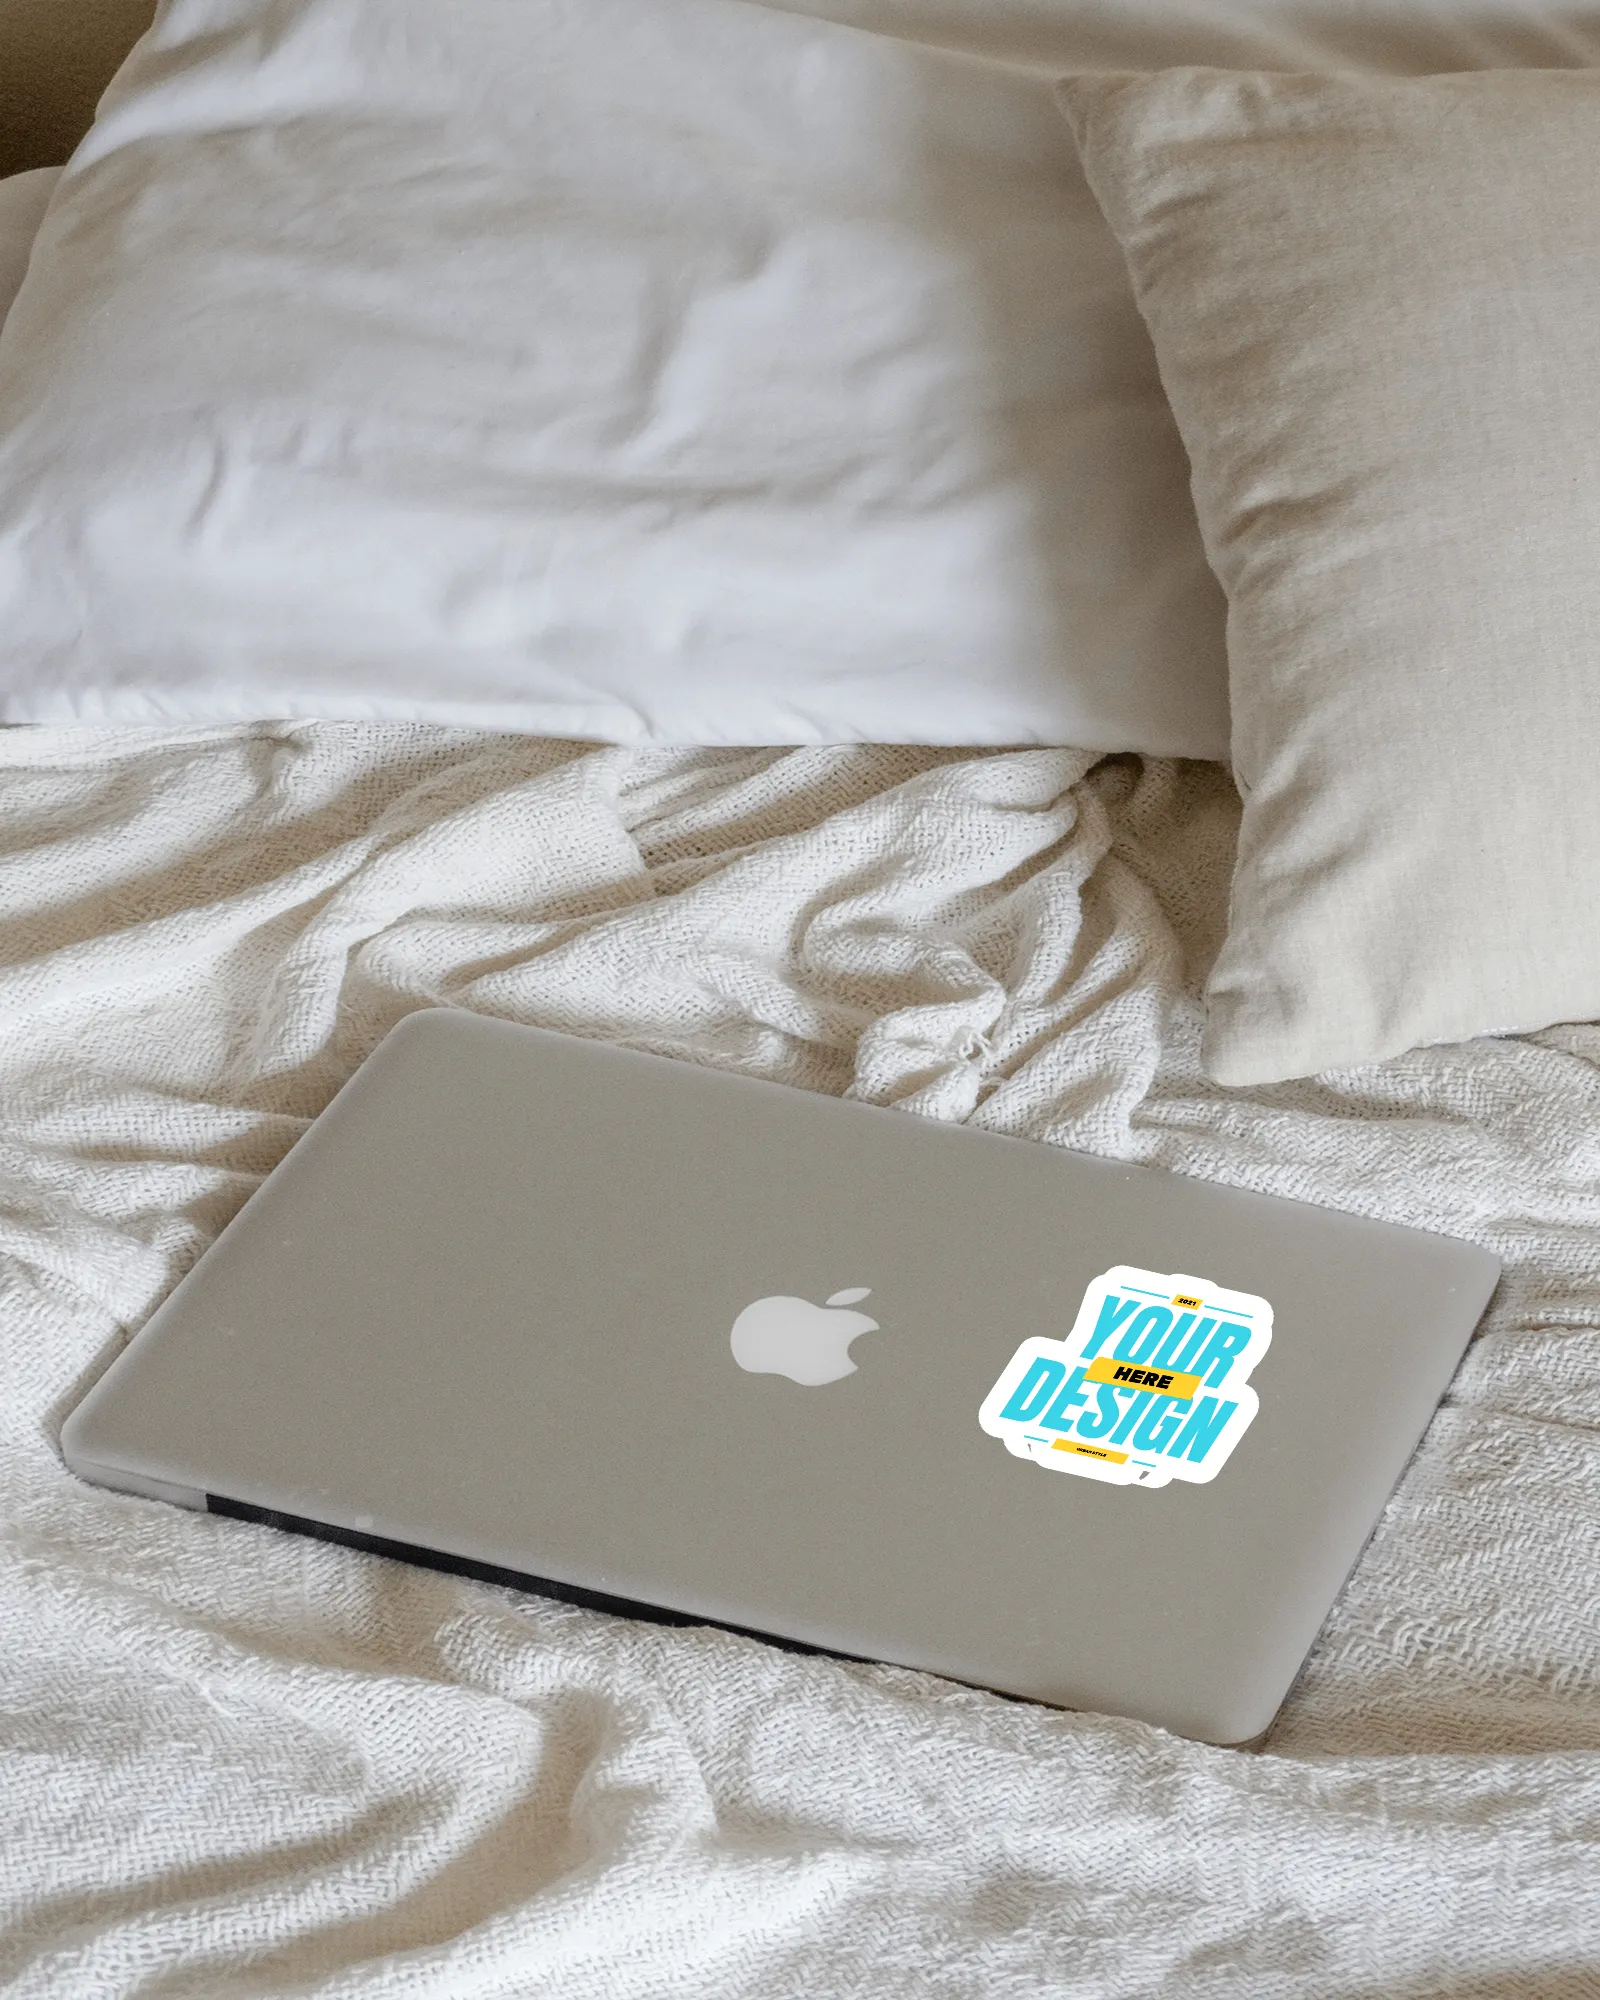 sticker mockup on a macbook lying on a bed